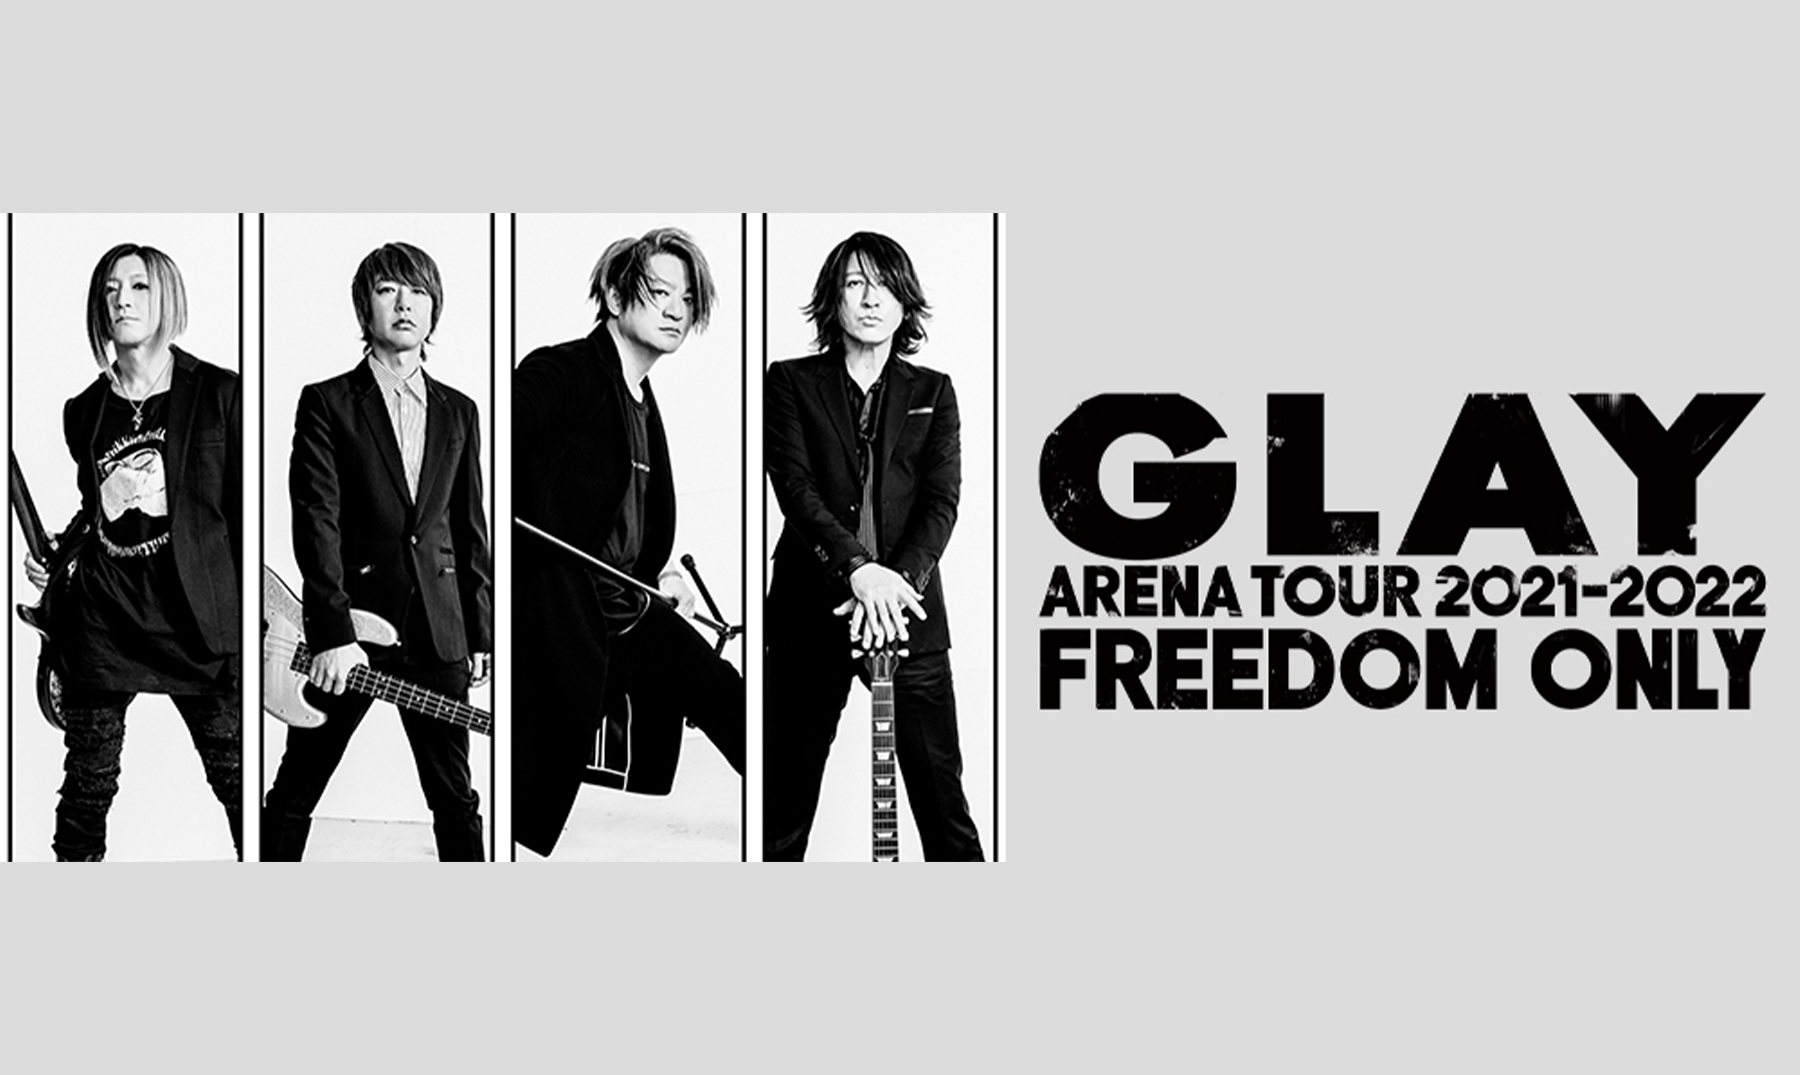 ARENA TOUR "FREEDOM ONLY"